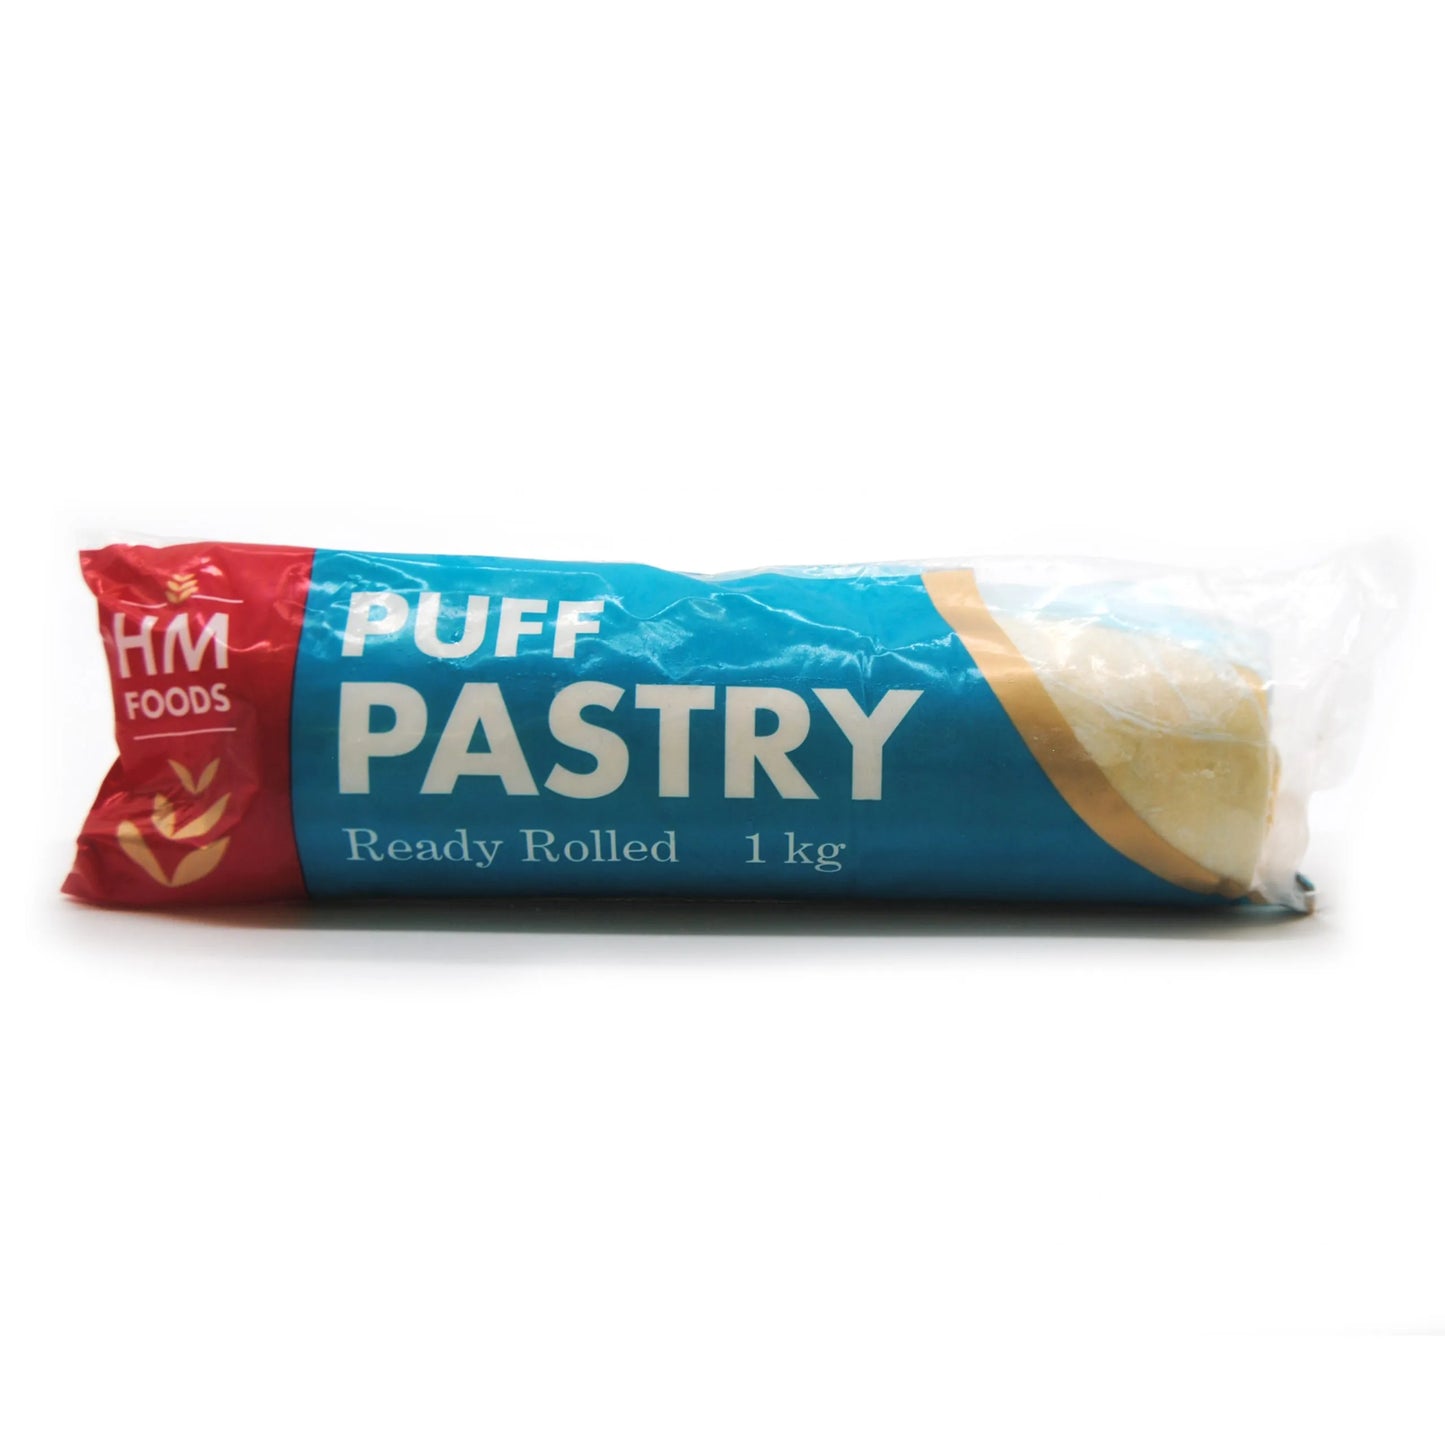 HM - Puff Pastry